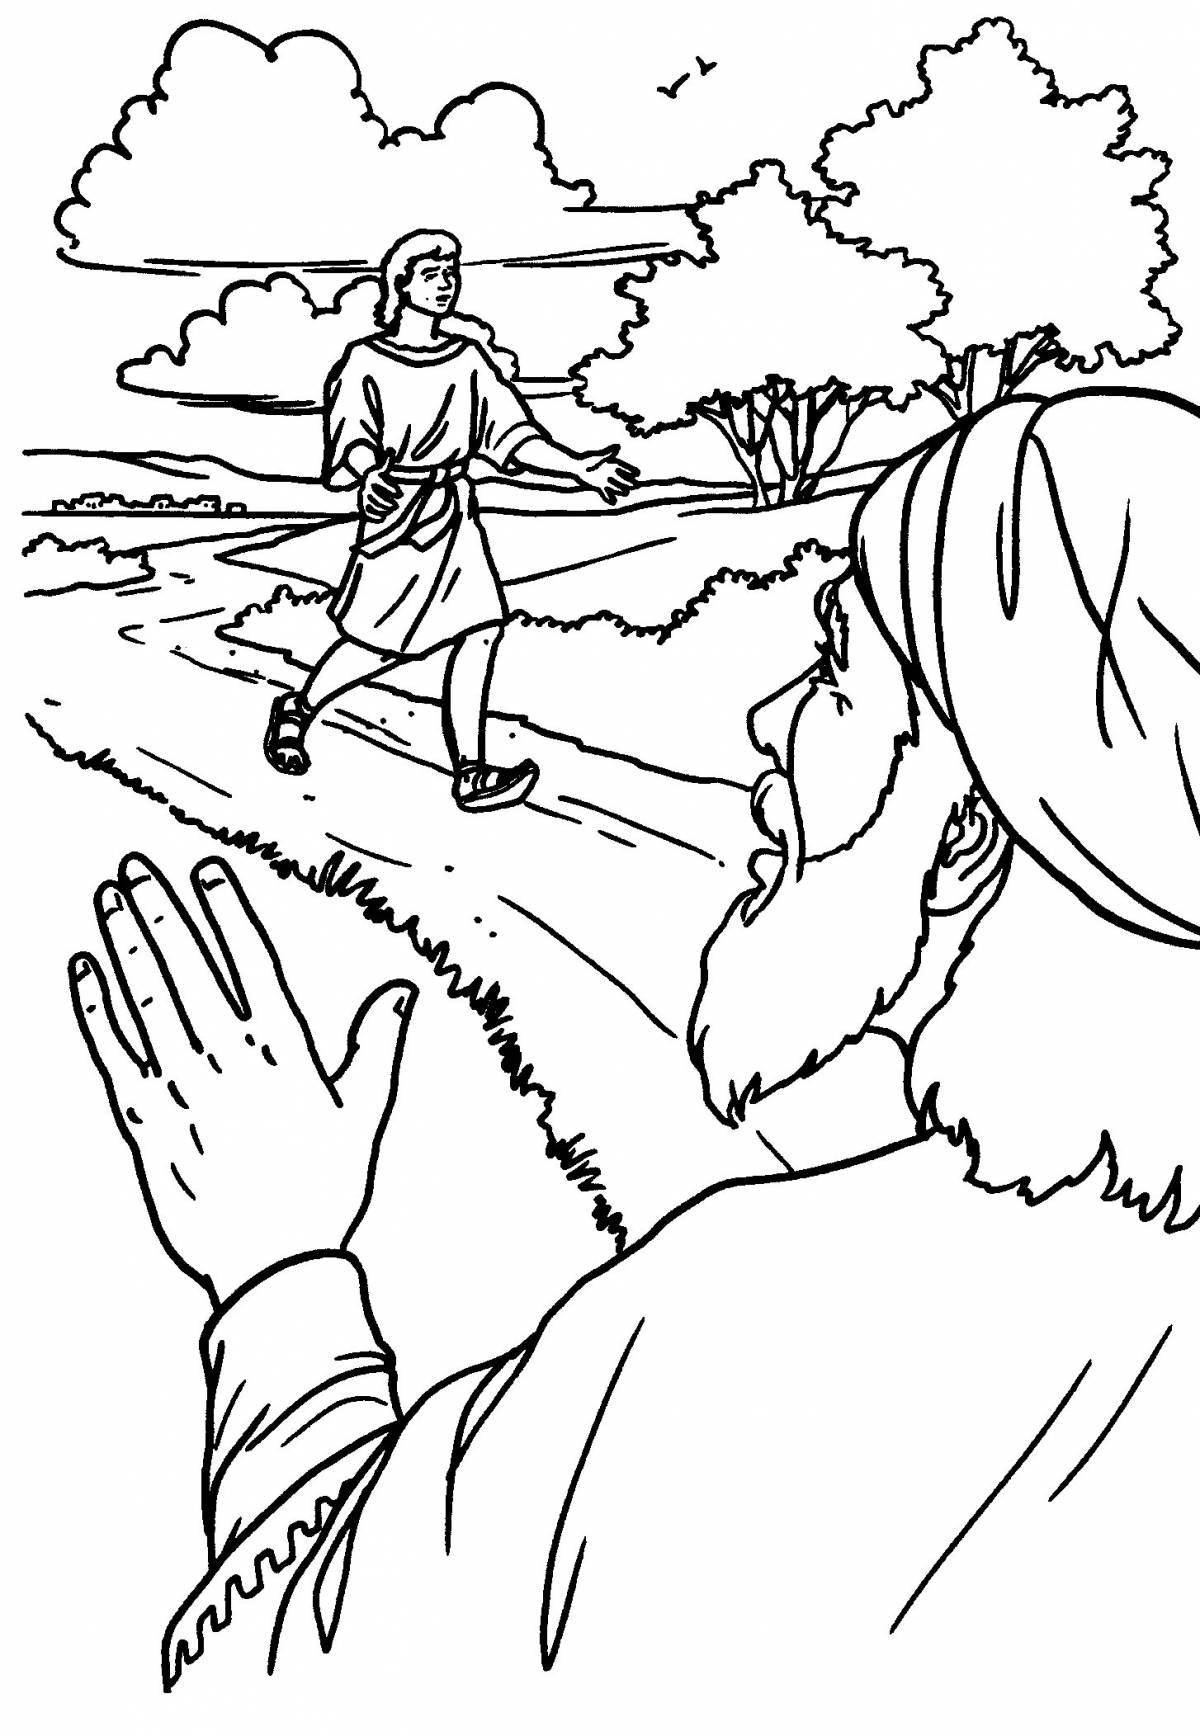 Prodigal Son Week Coloring Page